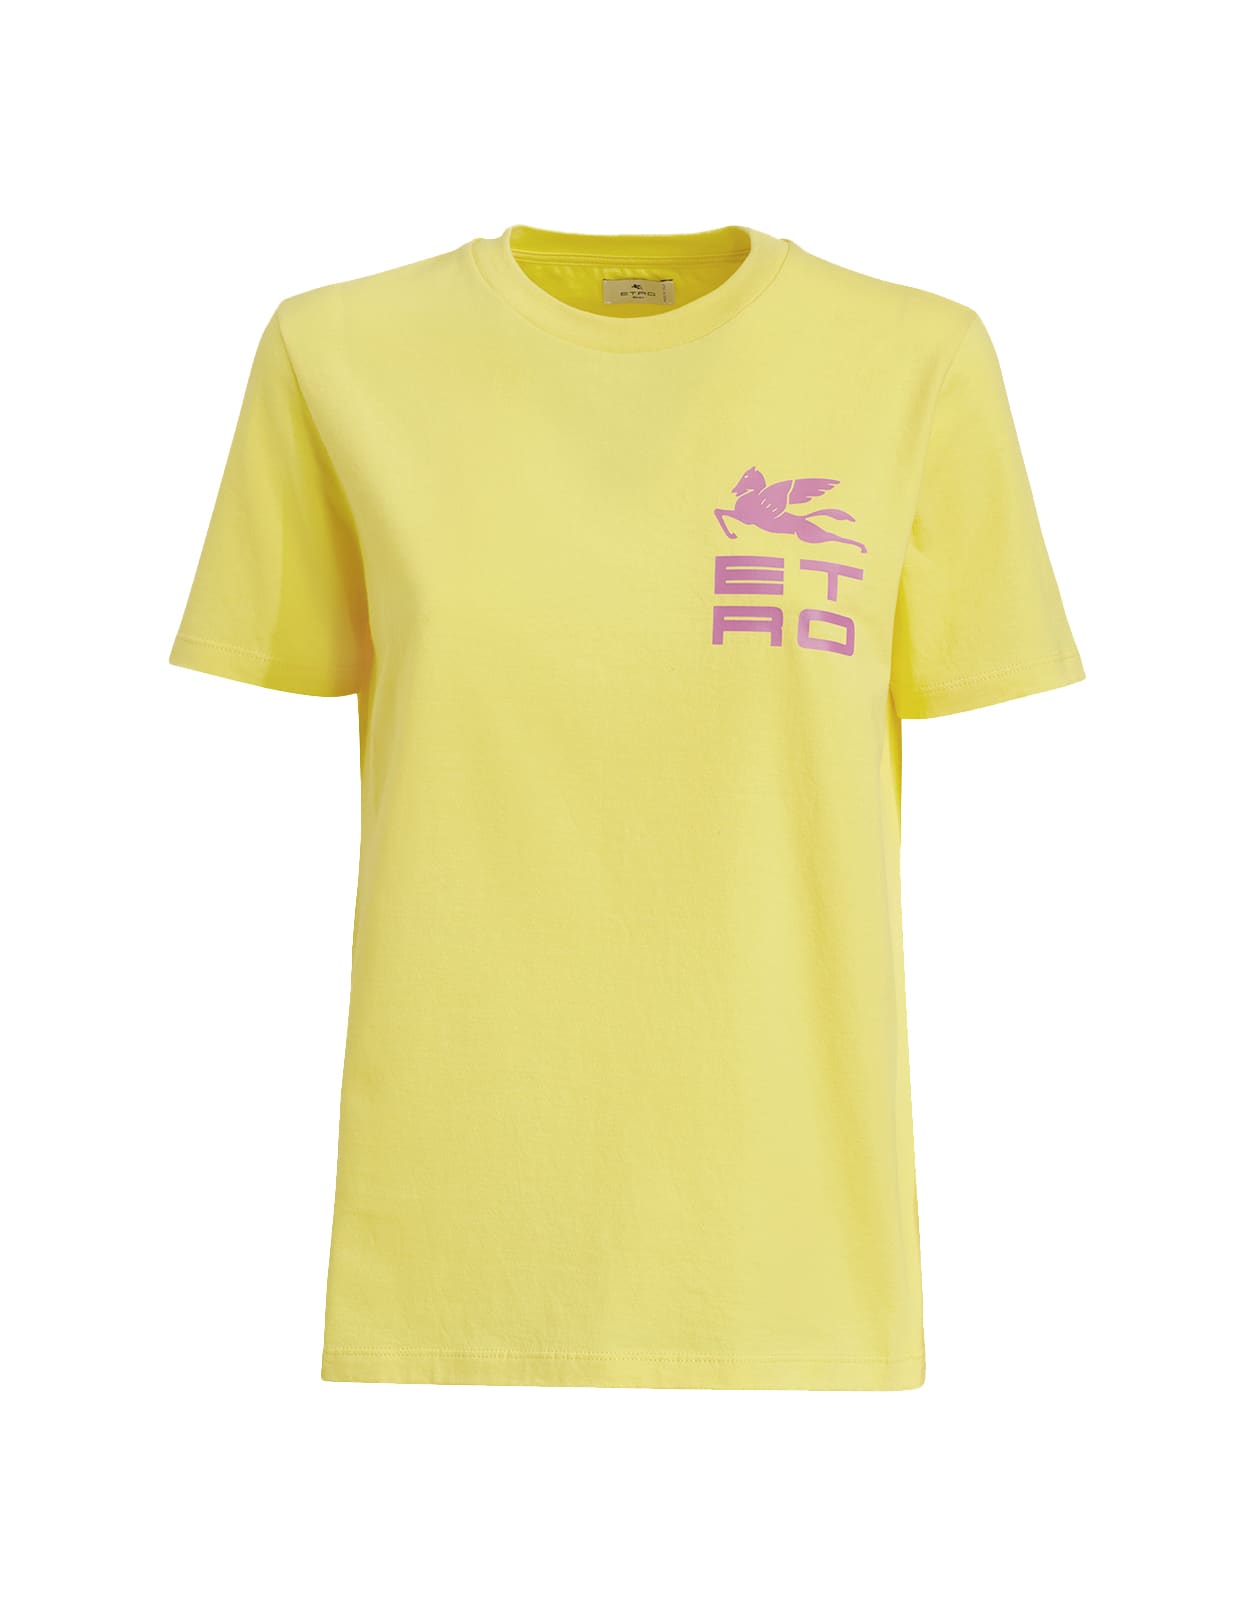 Woman Yellow T-shirt With Contrast Etro Cube Logo